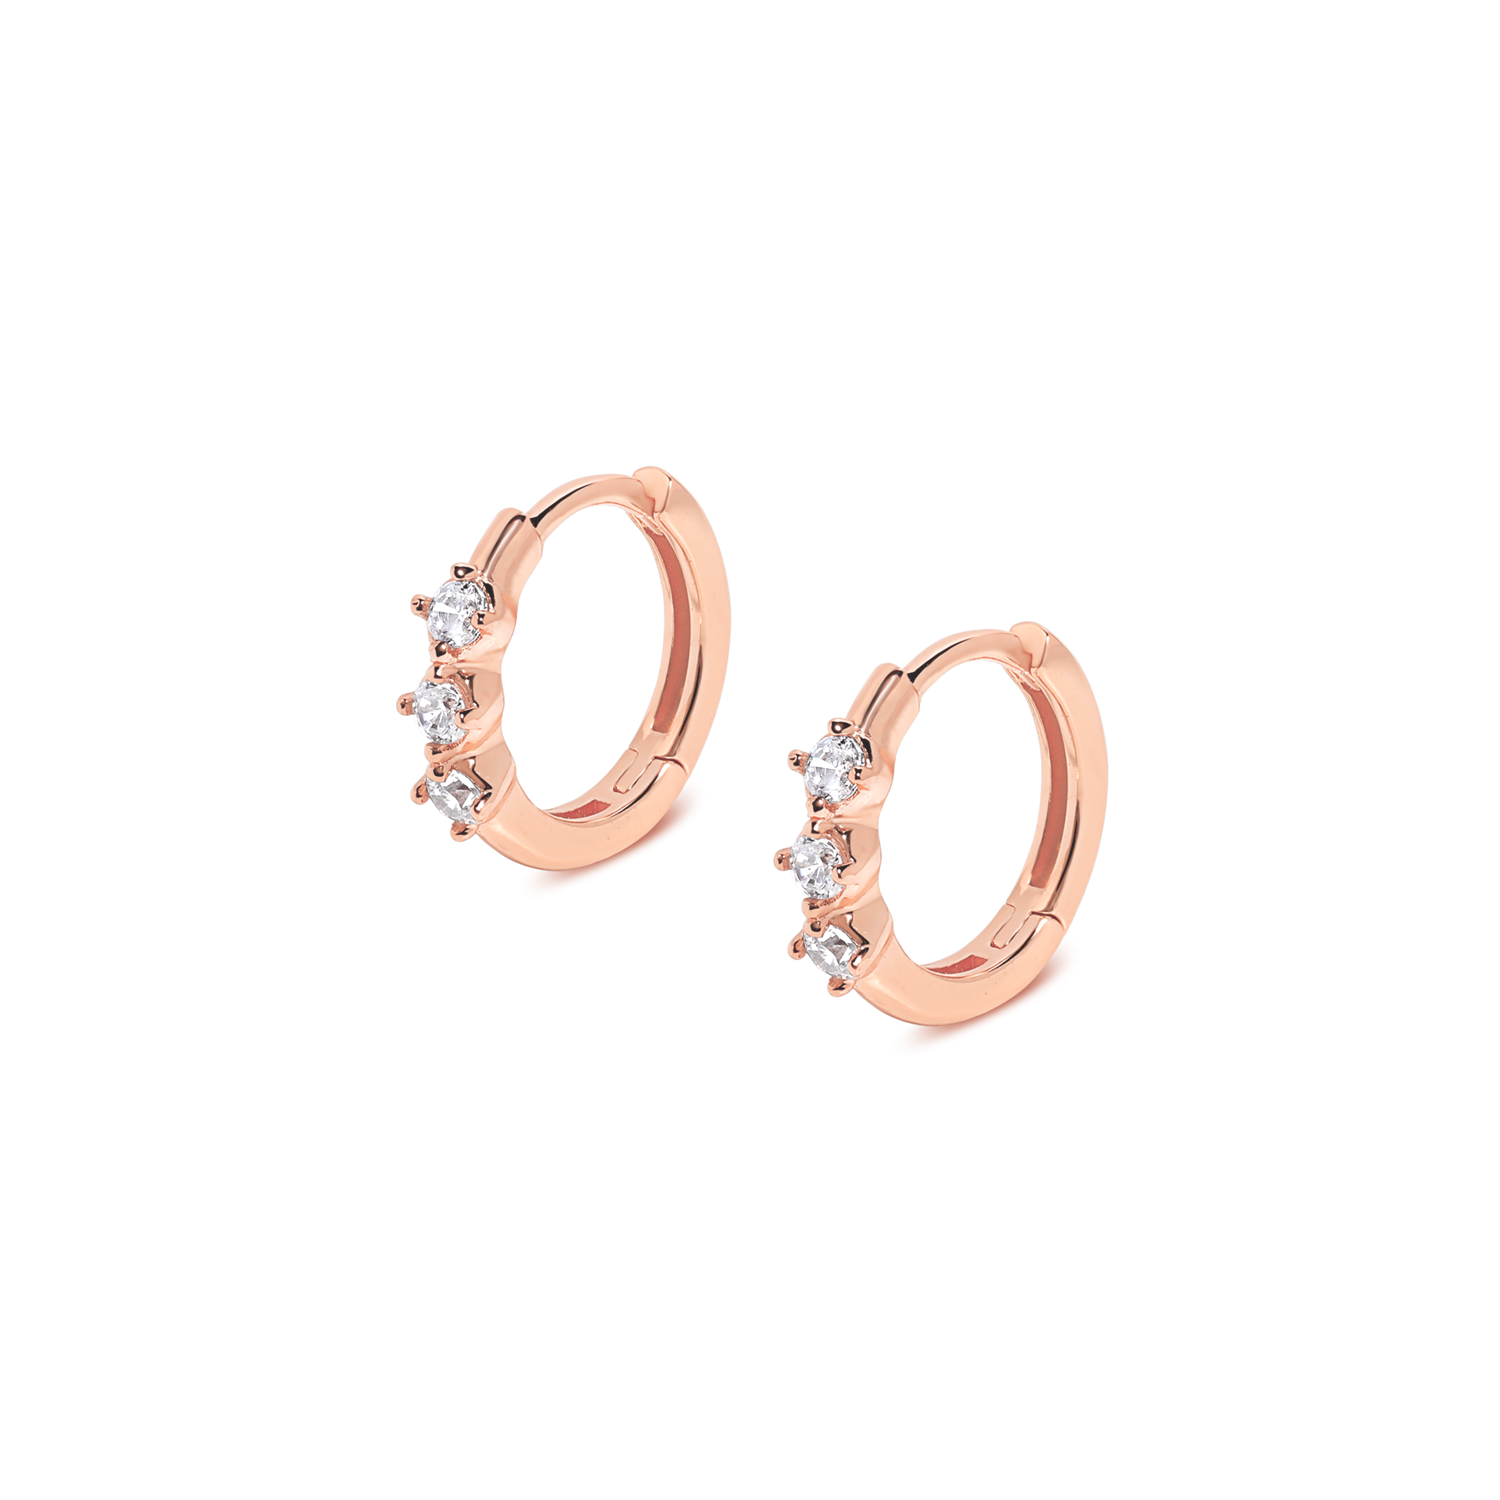 Luxurious and elegant earrings. rose gold huggies with cubic zirconia